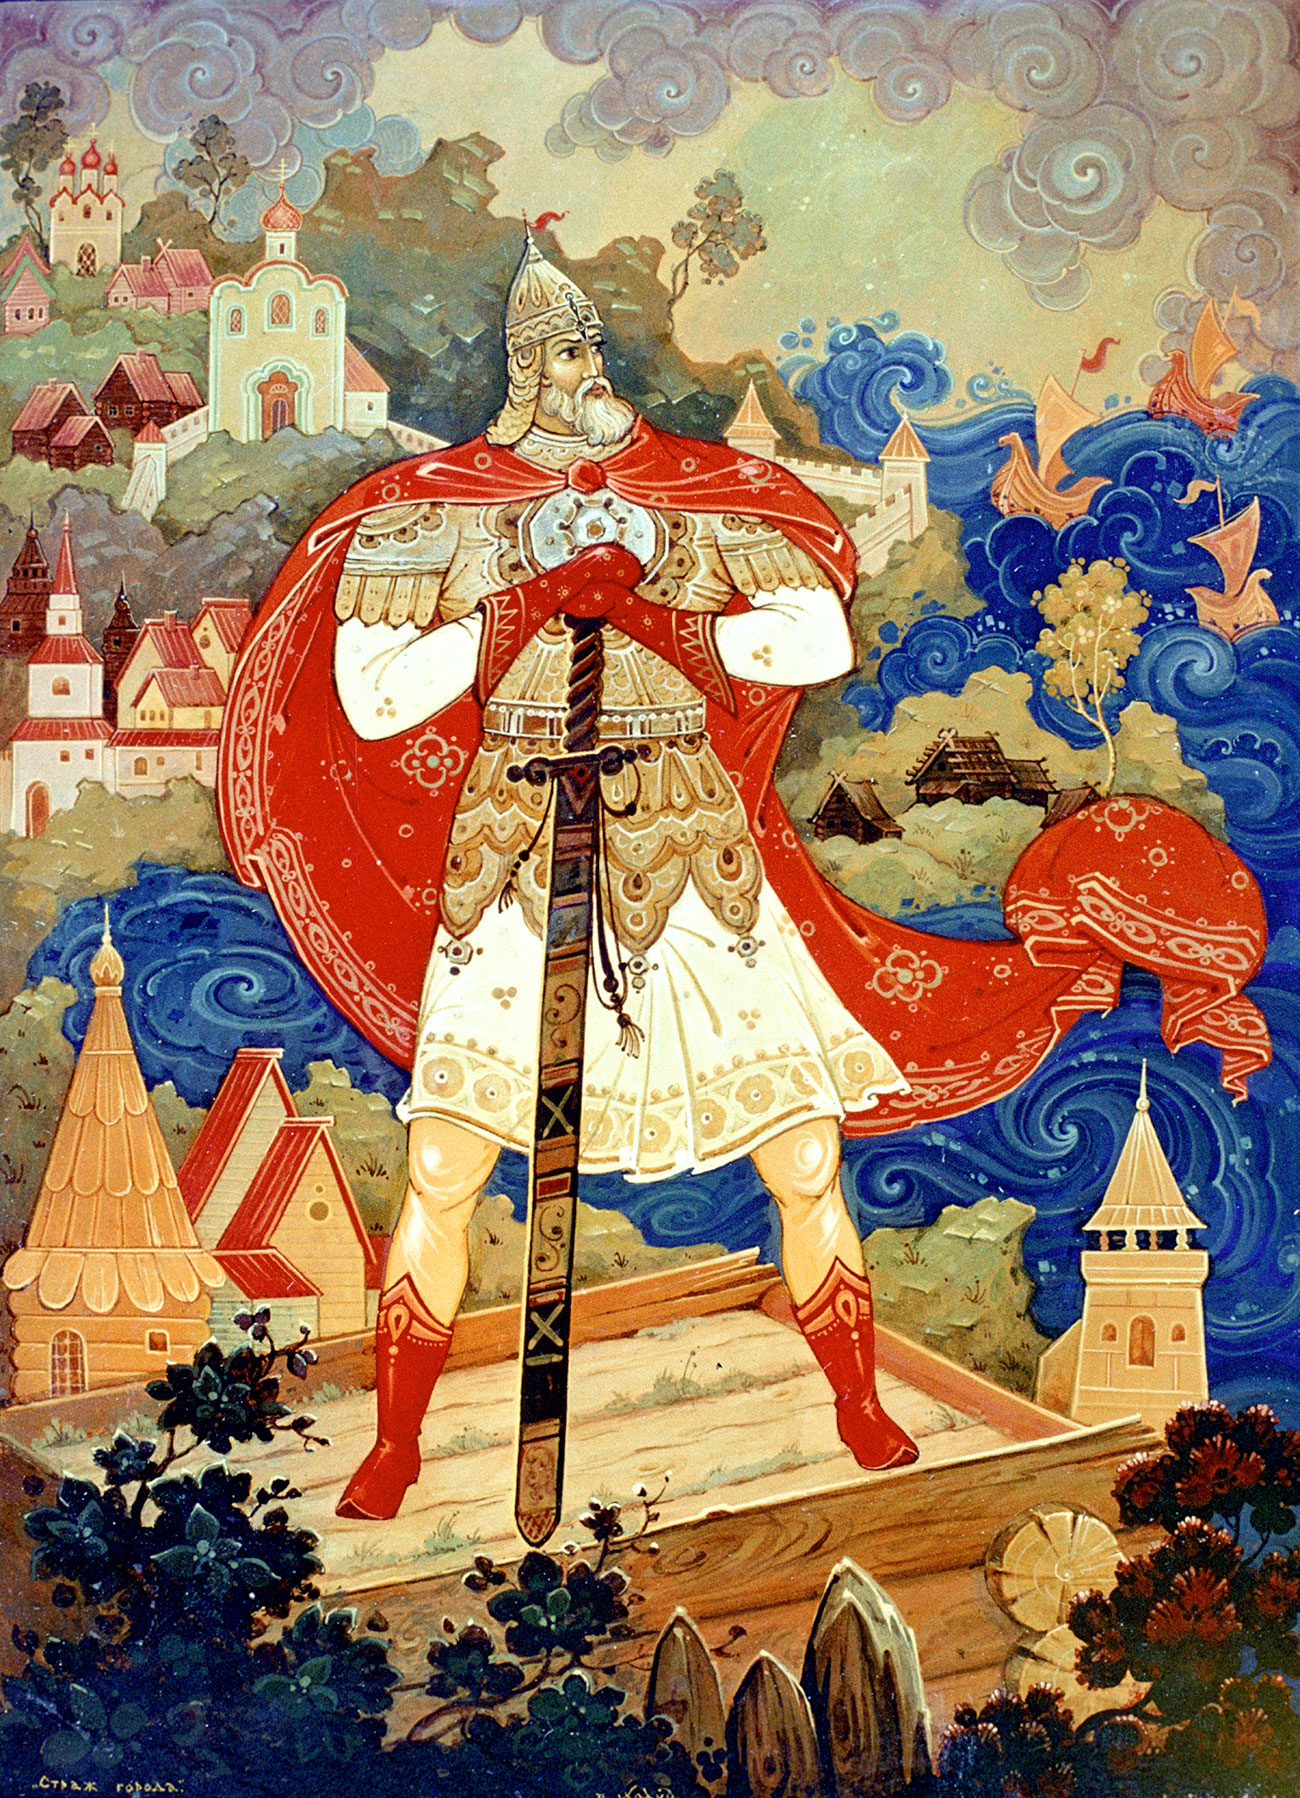 Prince Dmitry, picture by P. Mtyashin; Dmitry and his army defeated Mamai's troops in 1380 at the Battle of Kulikovo / Yuriy Kaver/Global Look Press